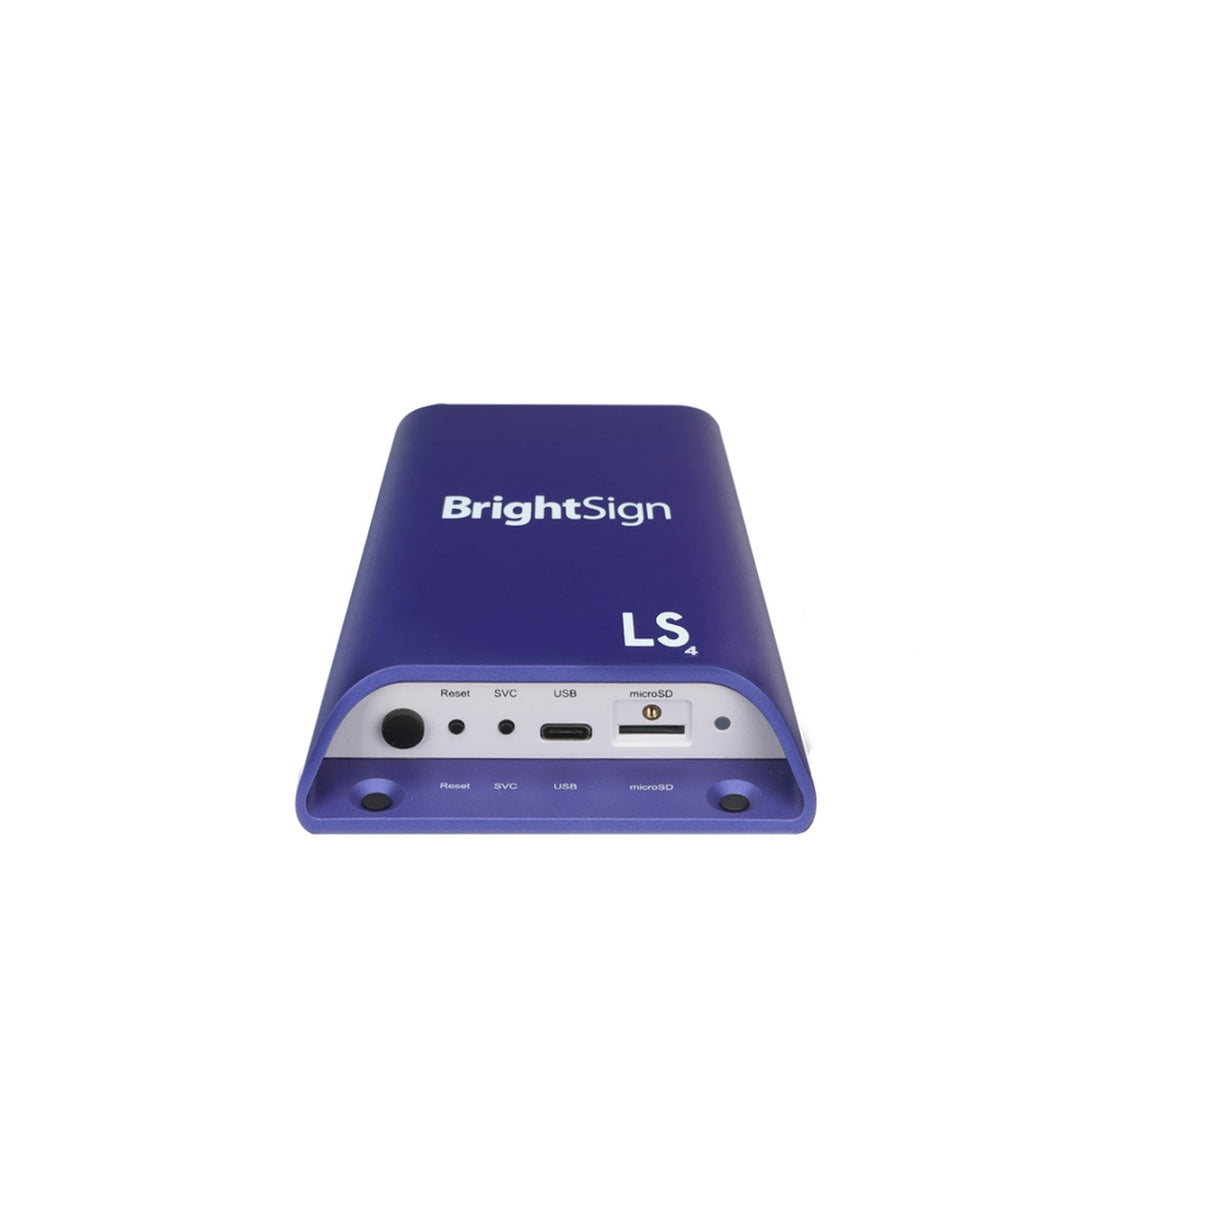 BrightSign LS424 H.265 Full HD Entry-Level HTML5 Player